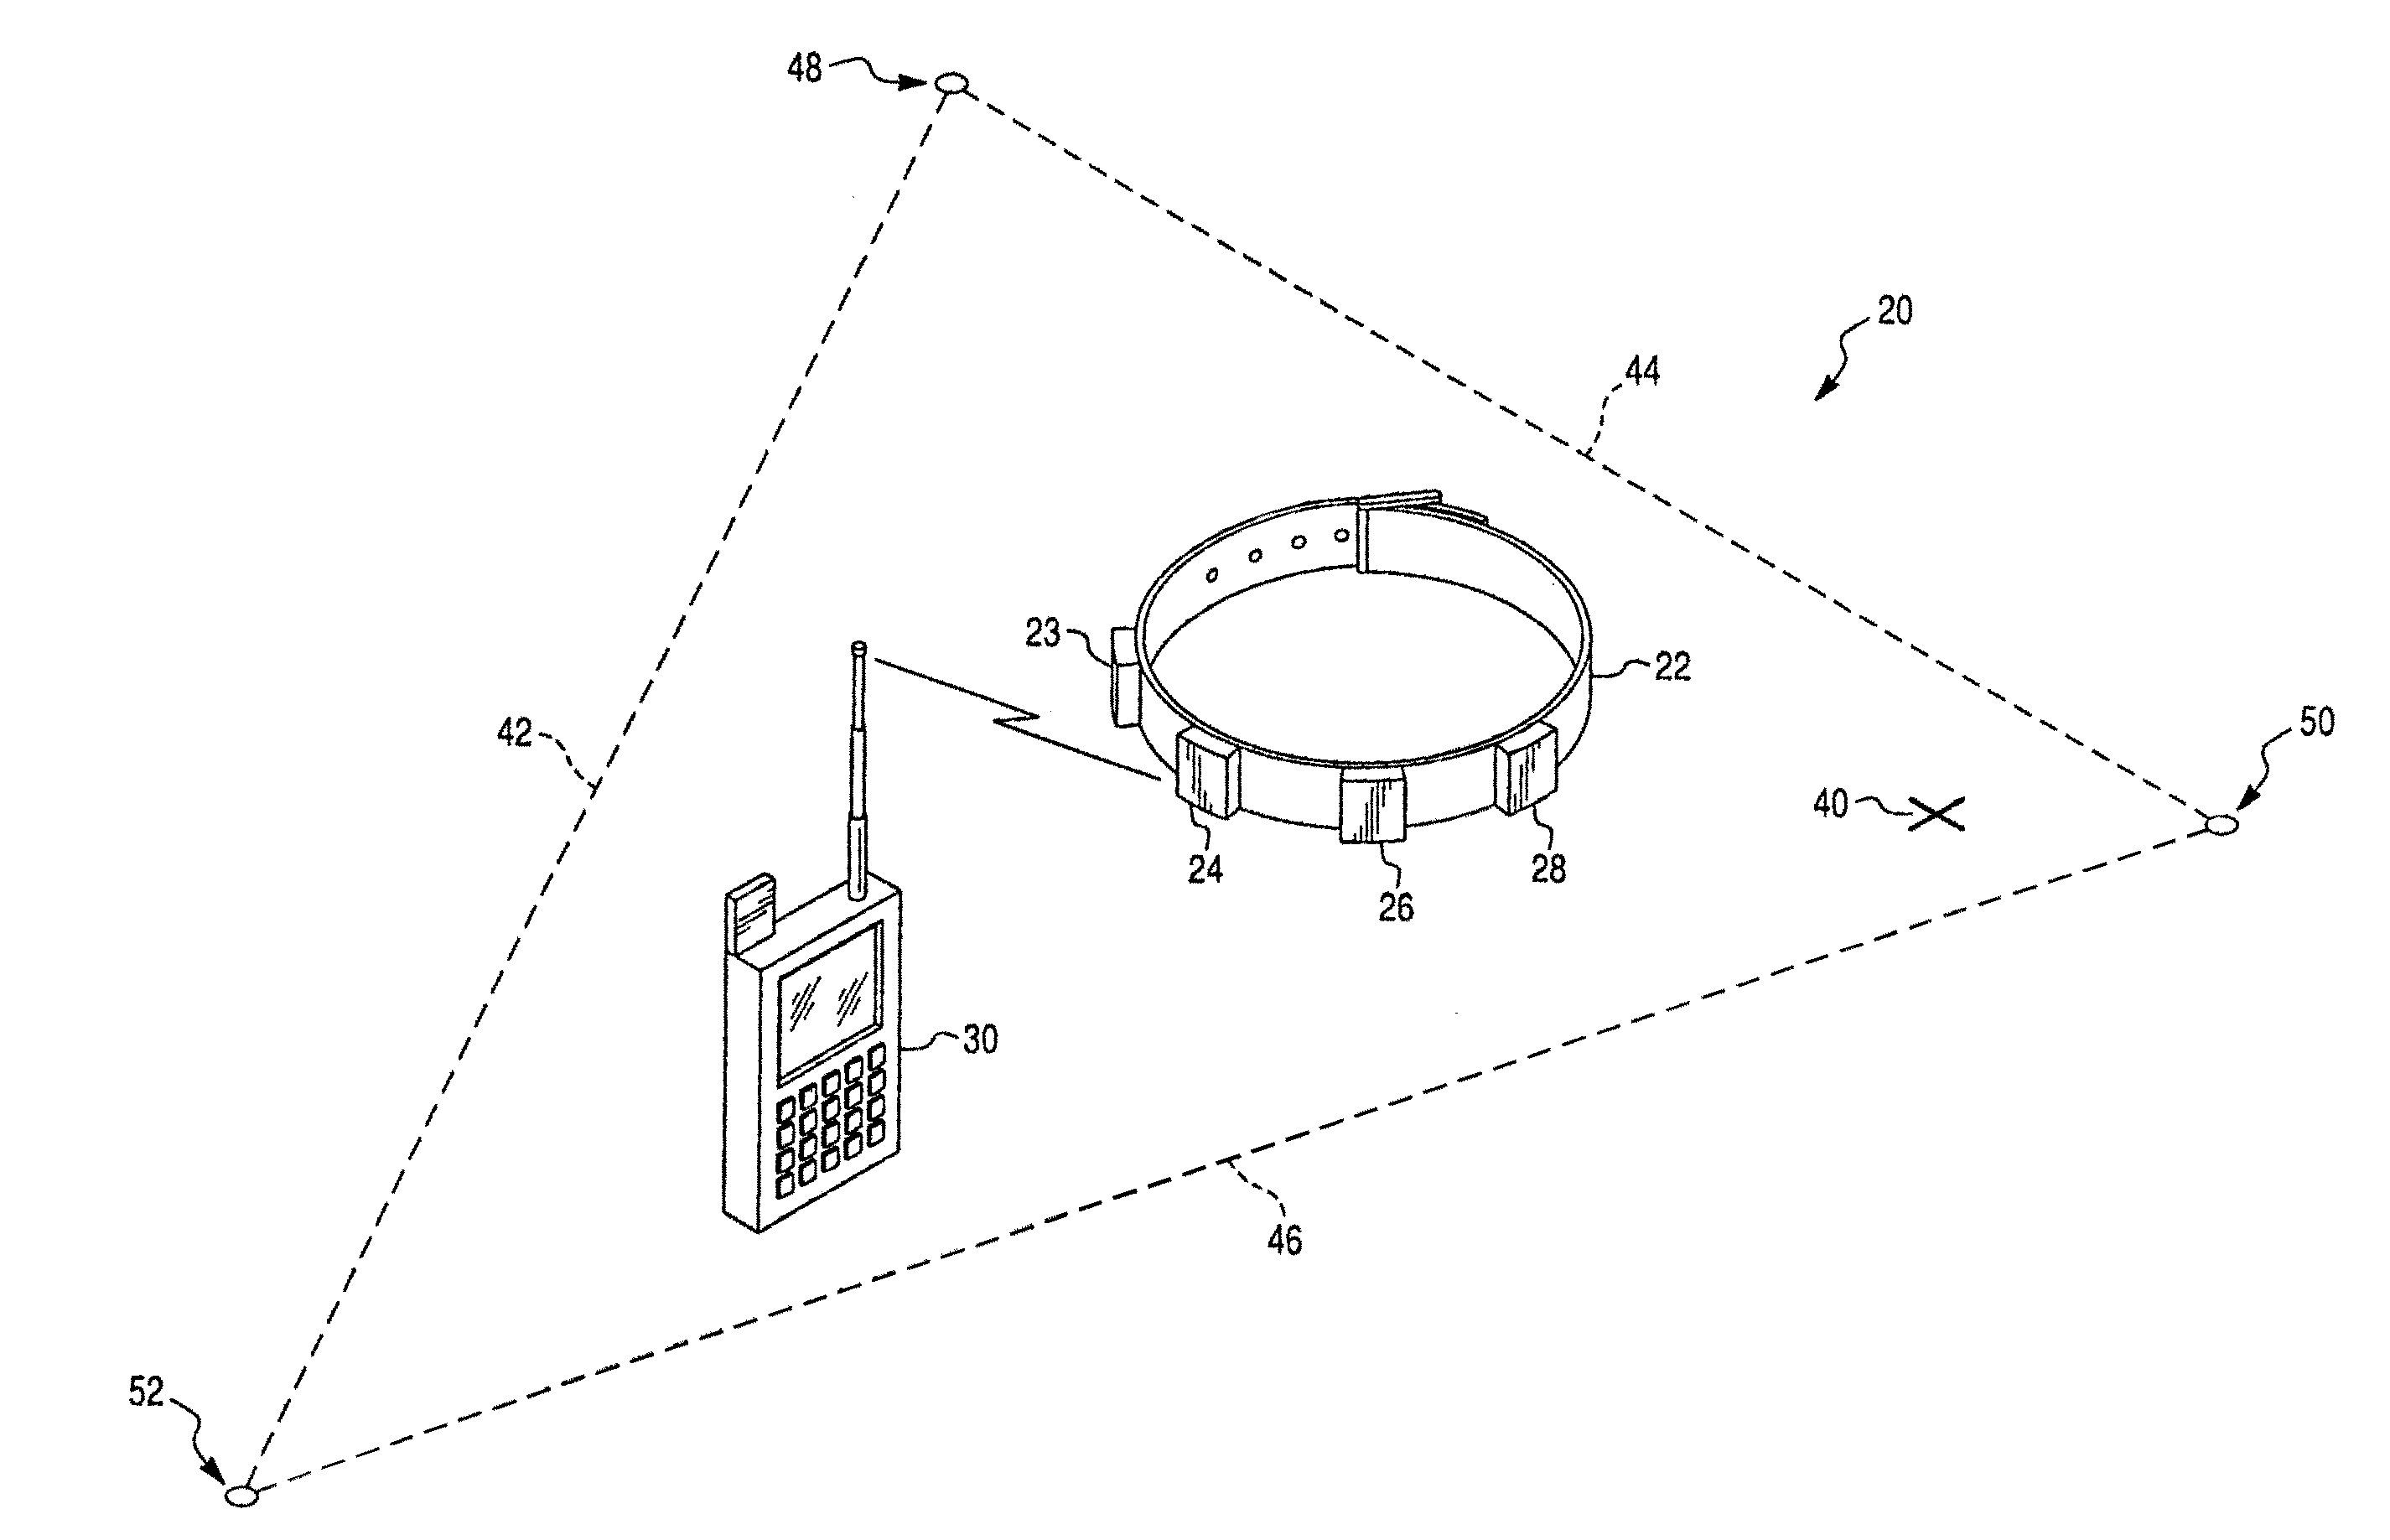 Method and apparatus for training and for constraining a subject to a specific area